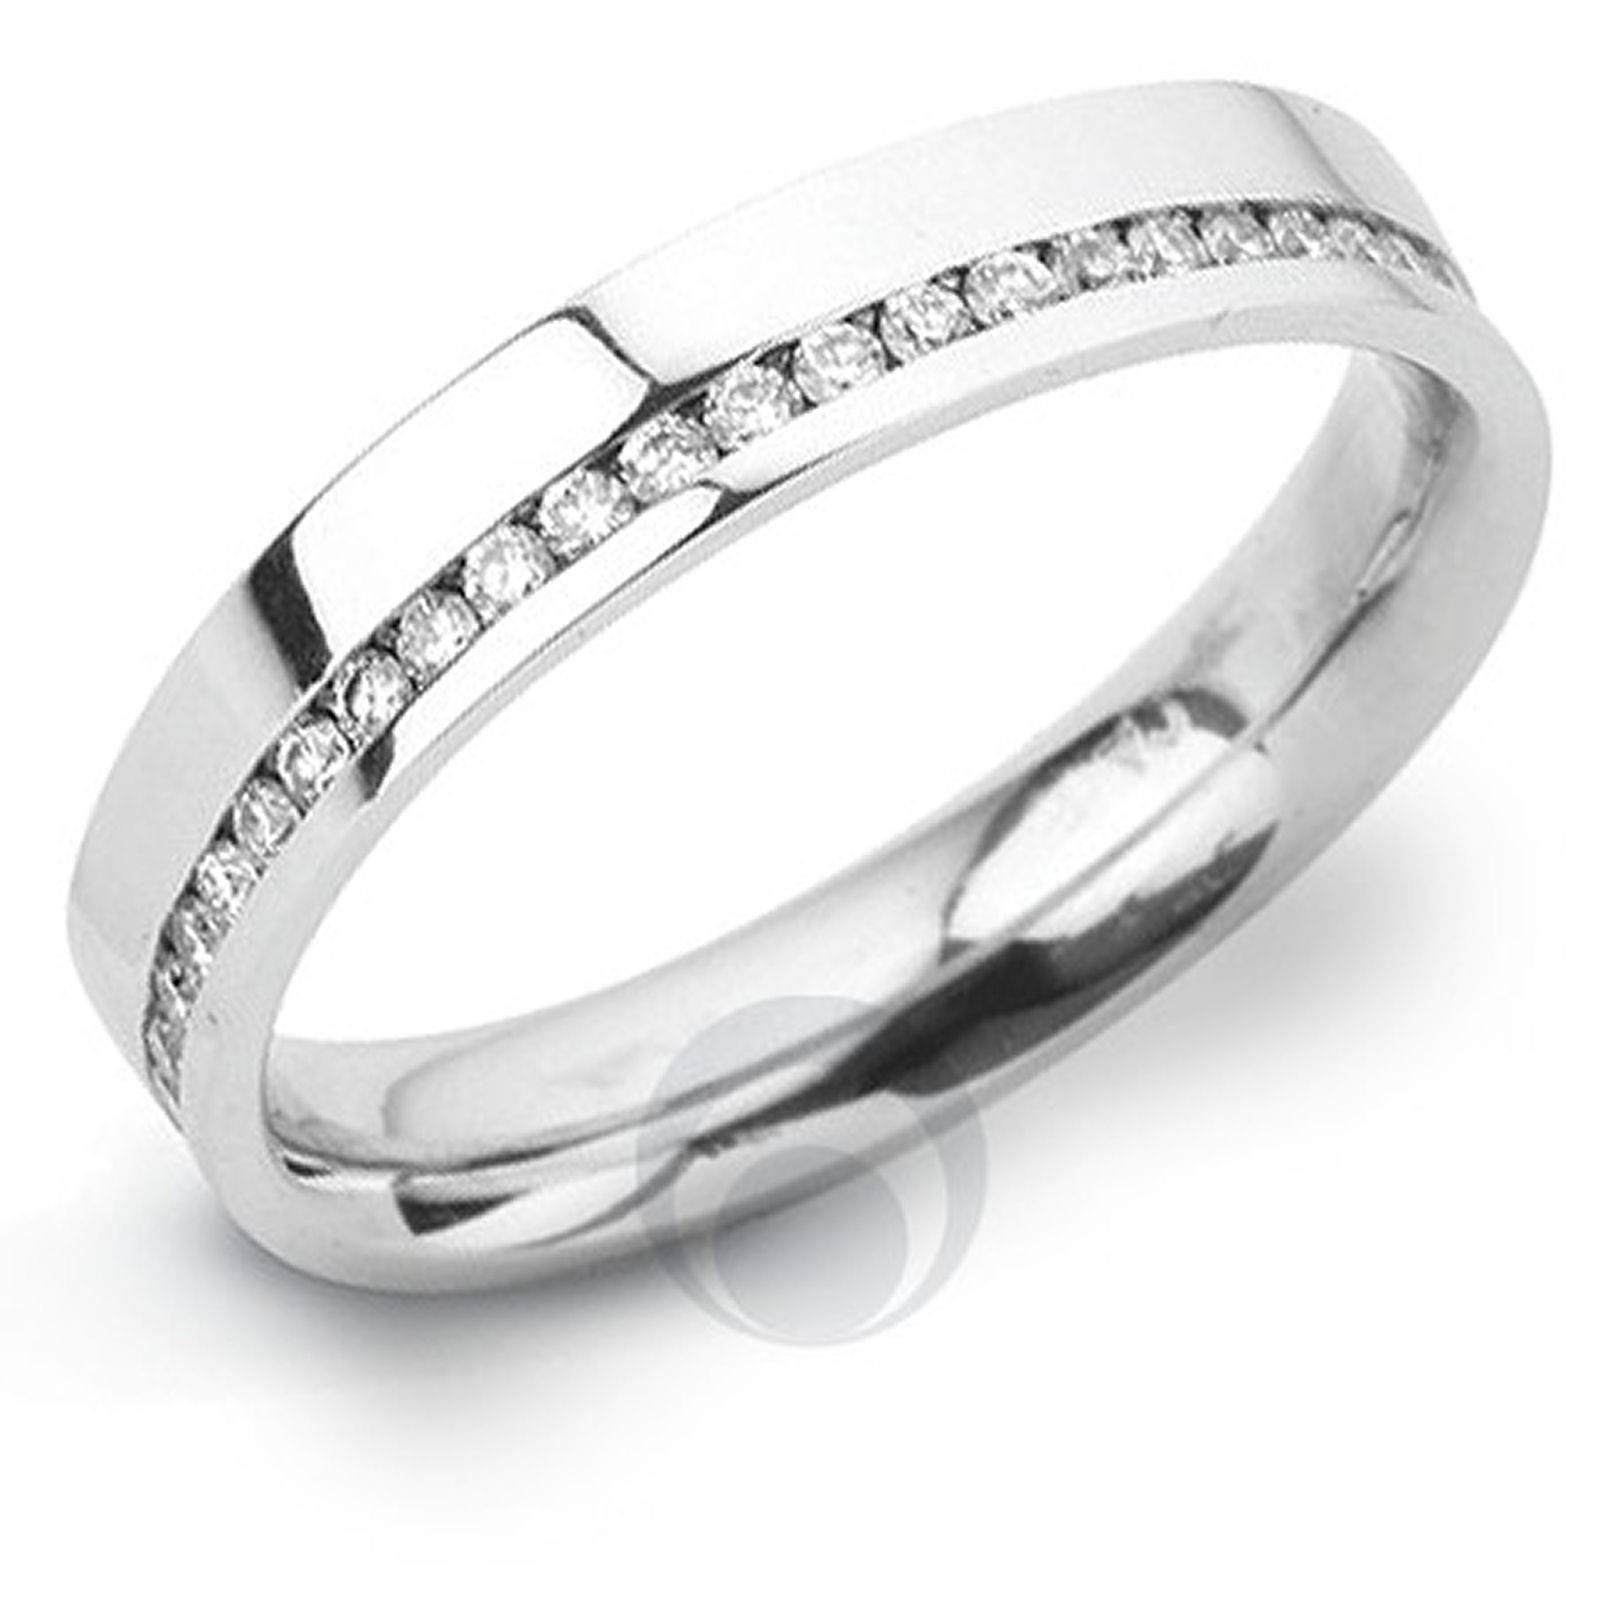 Channel Diamond Platinum Wedding Ring Wedding Dress From The Intended For Wedding Rings With Platinum Diamond (View 2 of 15)